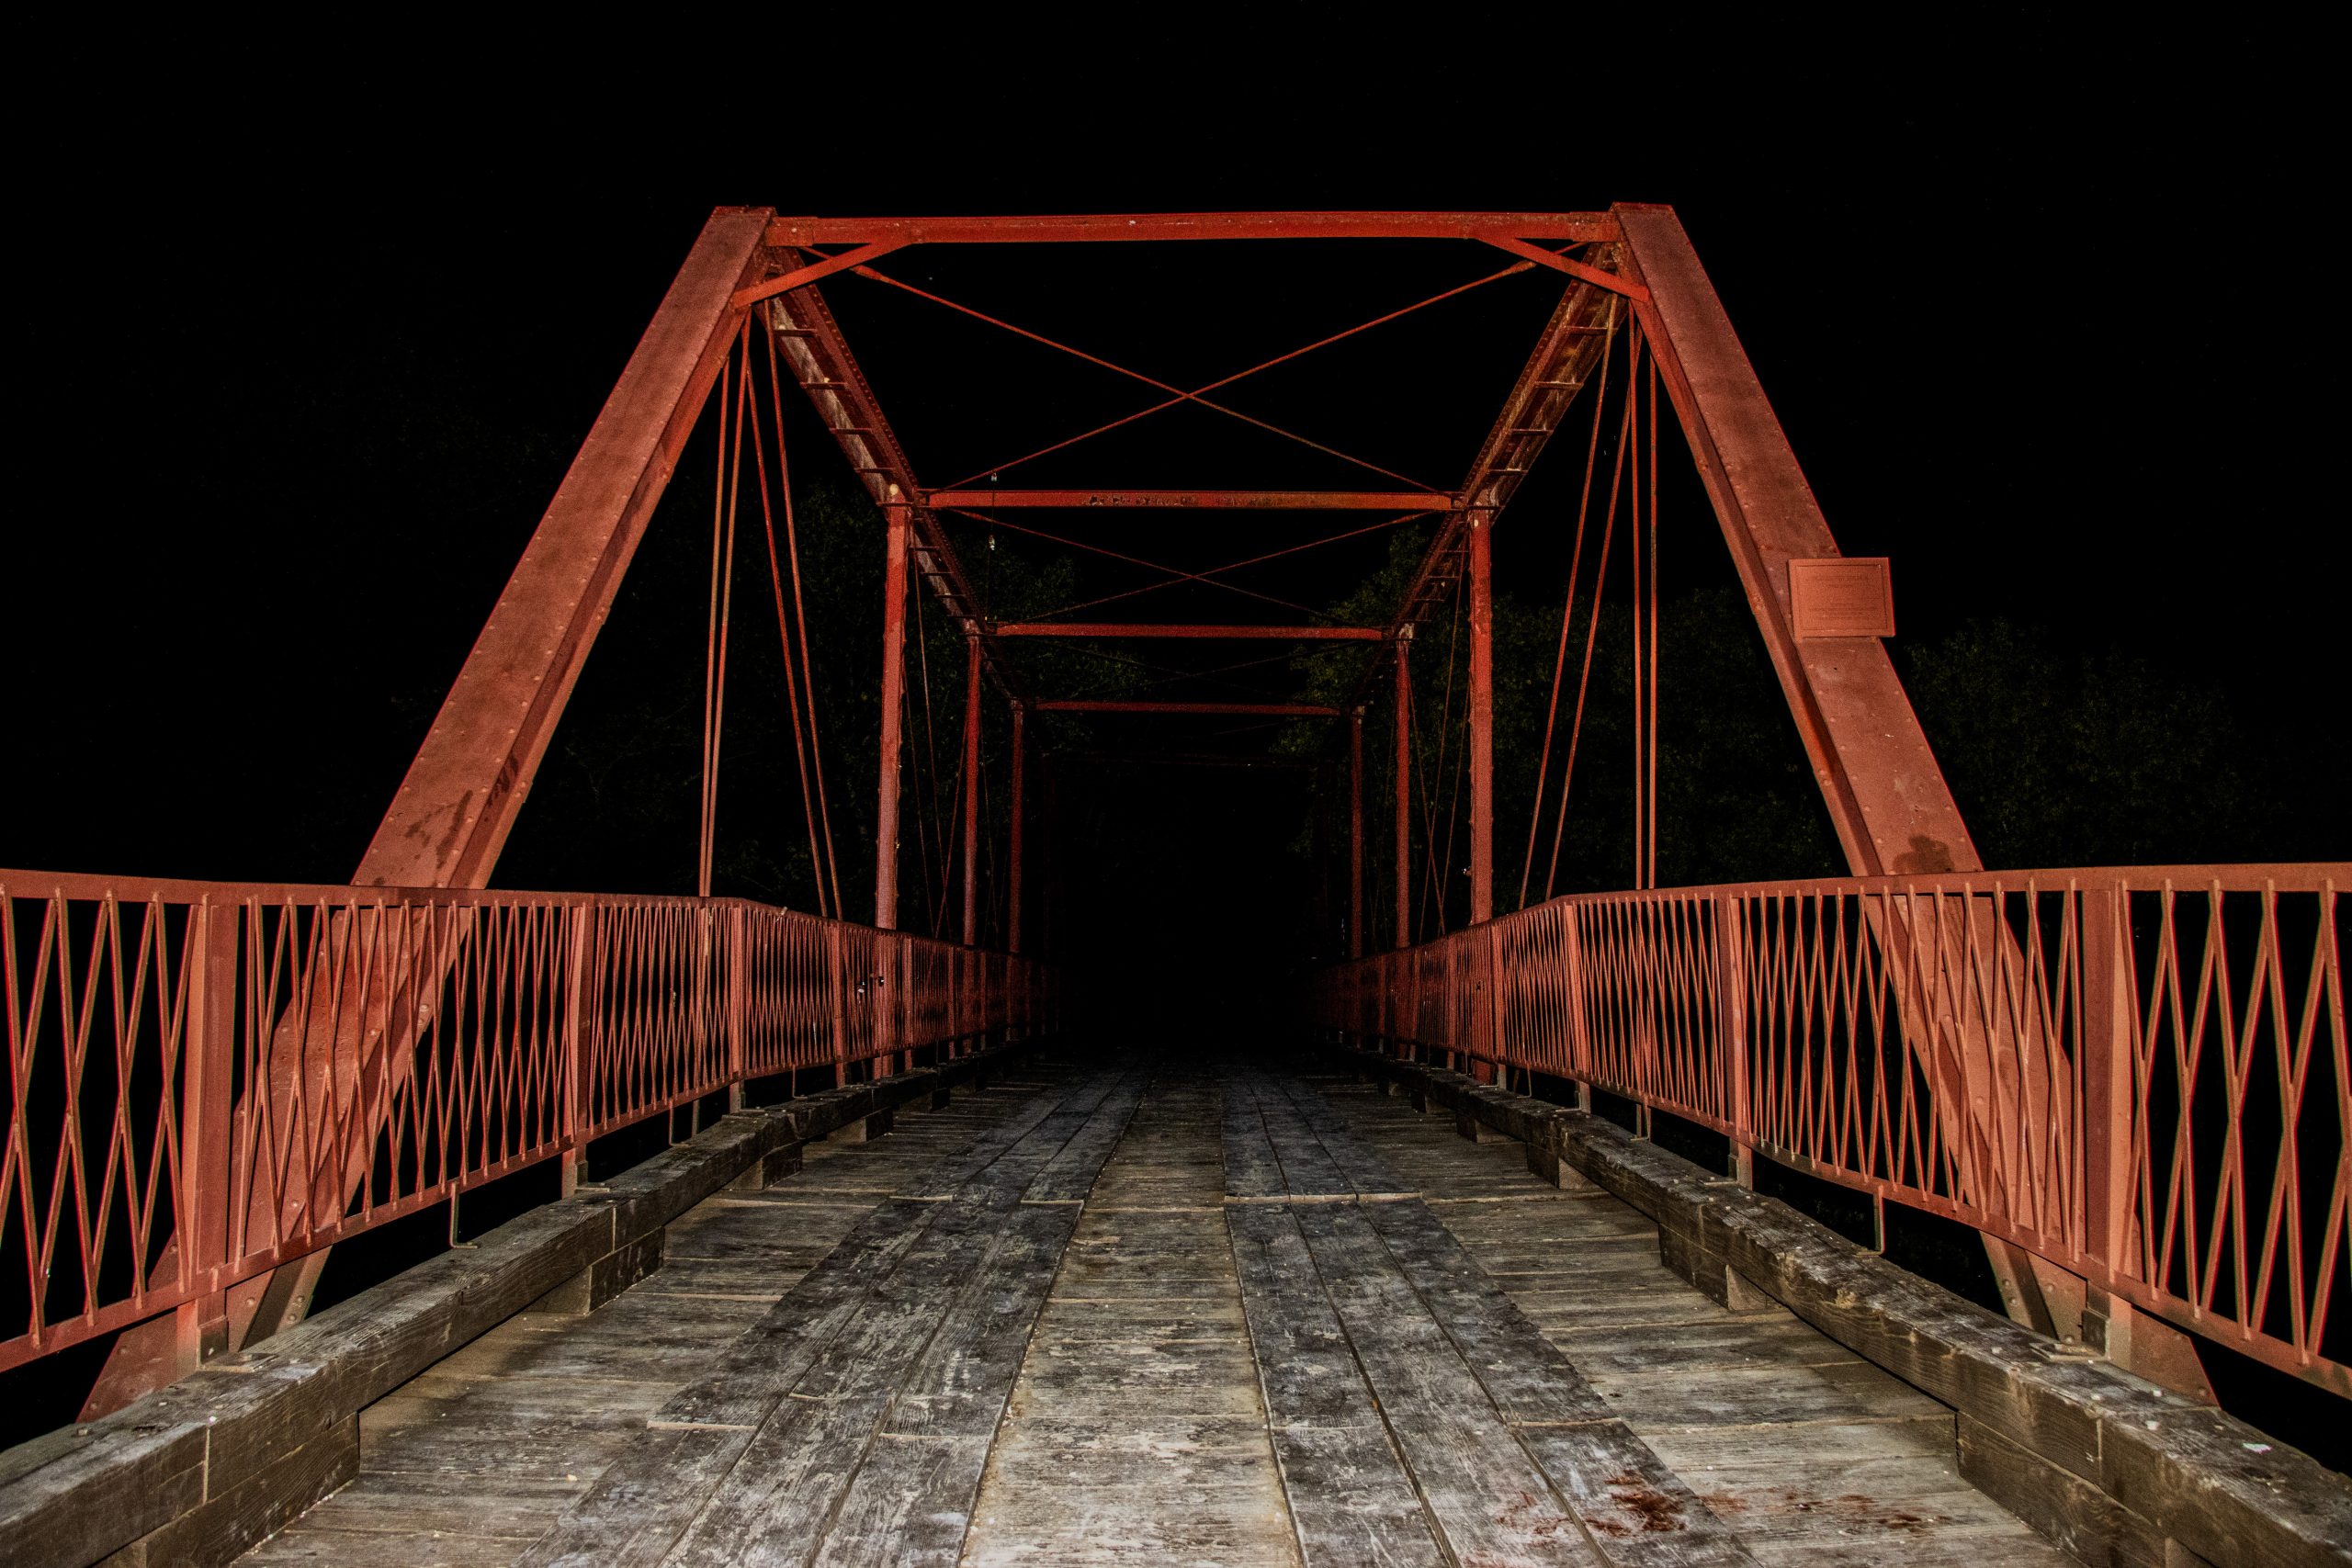 Alex Hoben/The Collegian Found between Denton and Argyle, the Old Alton Bridge is host to many haunting ghost stories. The most frightening being tales of a supposed Goat Man whose eyes you can see glowing in the distance.